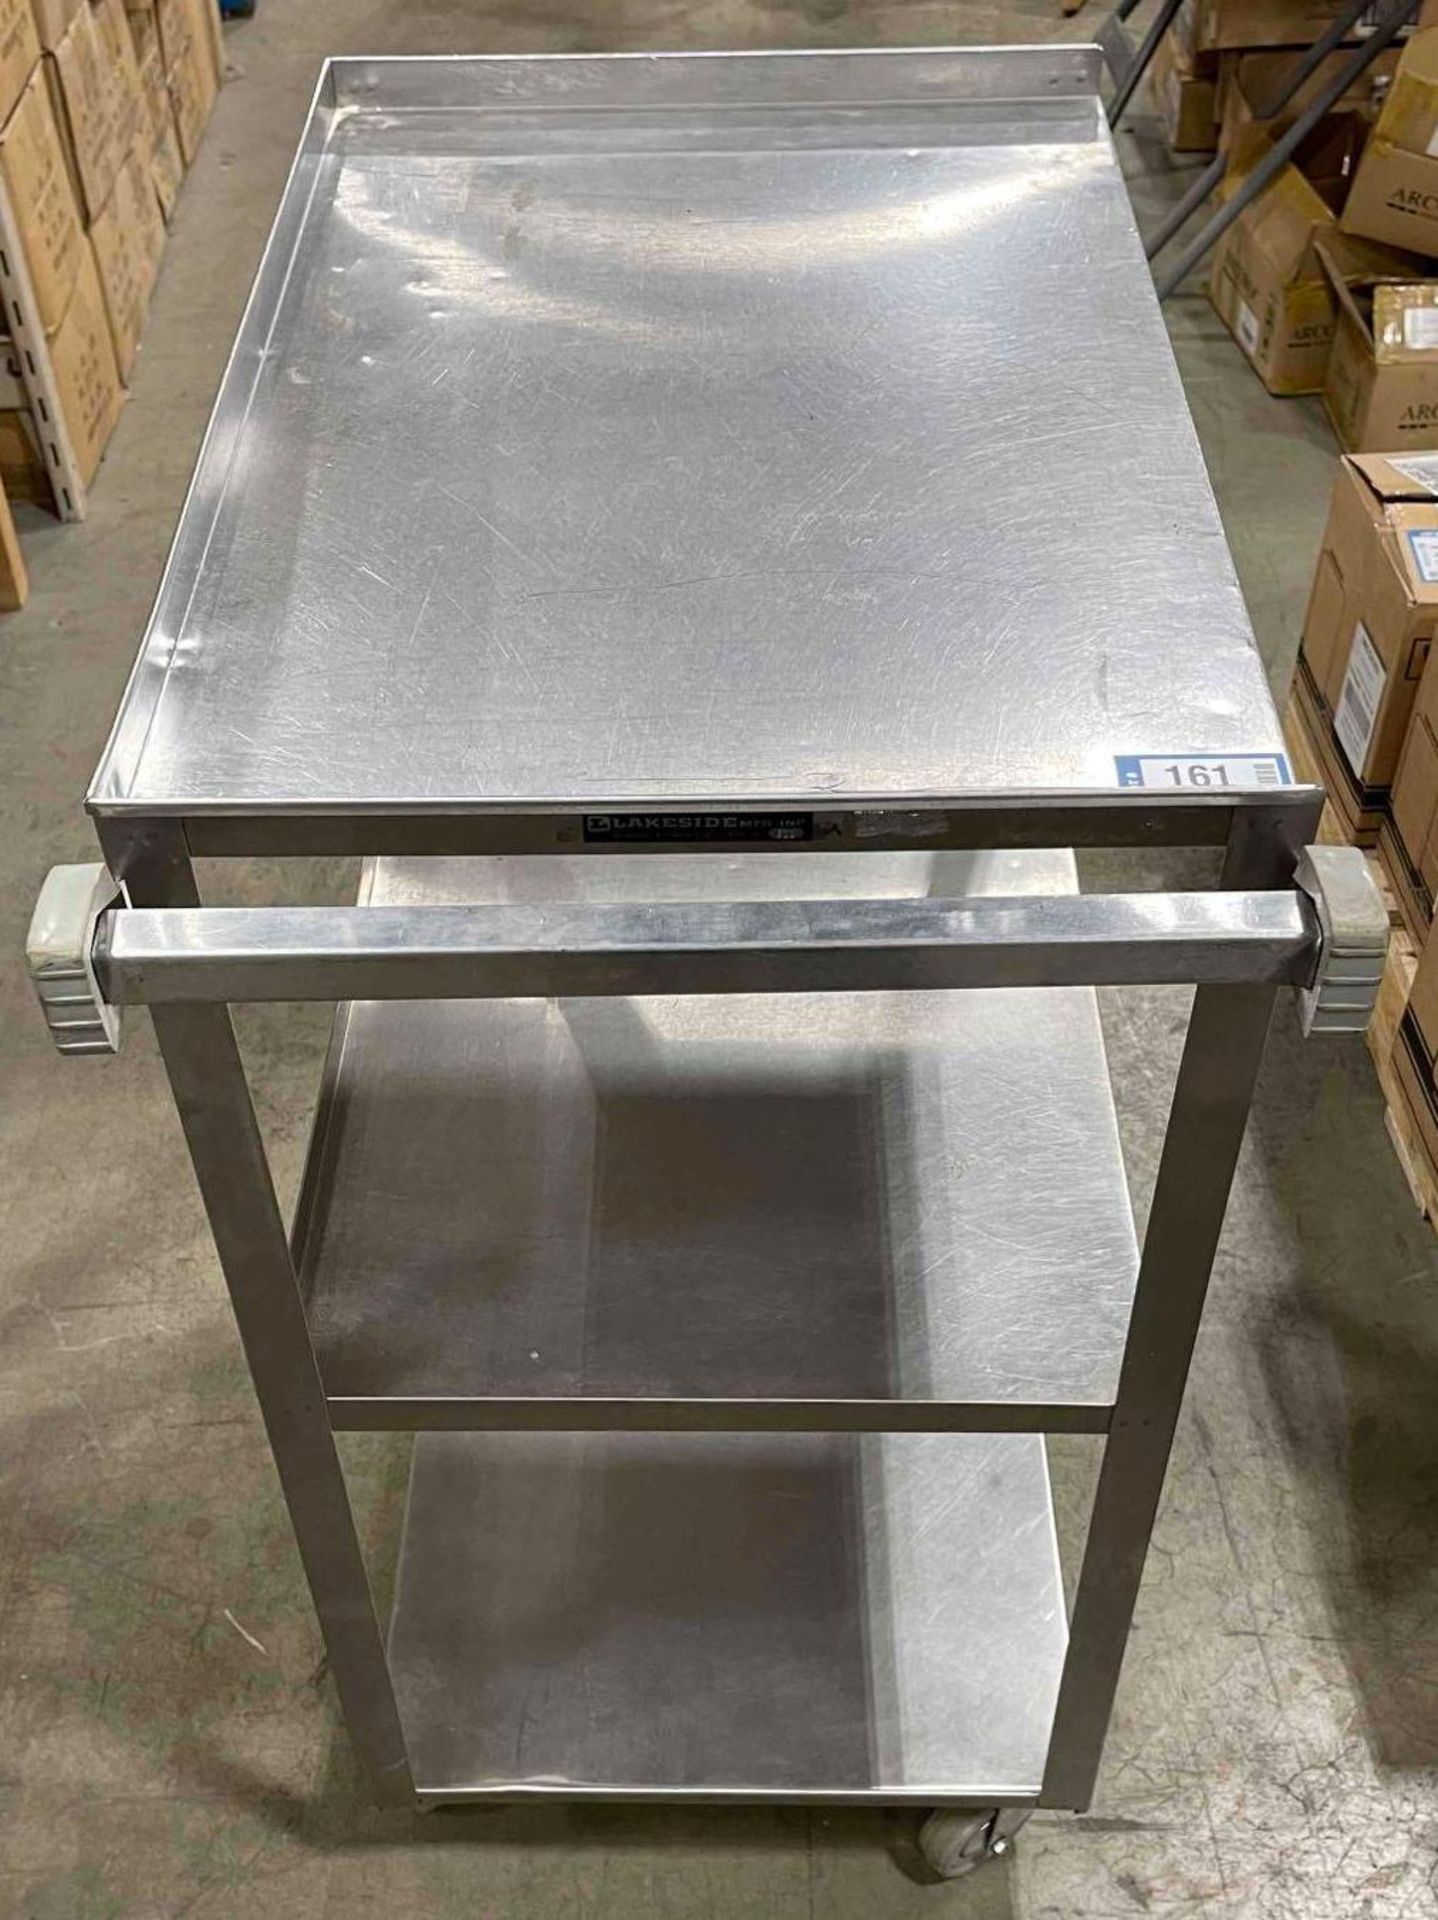 LAKESIDE 311 STAINLESS STEEL UTILITY CART 27" X 16" X 32" 300 LB CAPACITY - Image 2 of 4